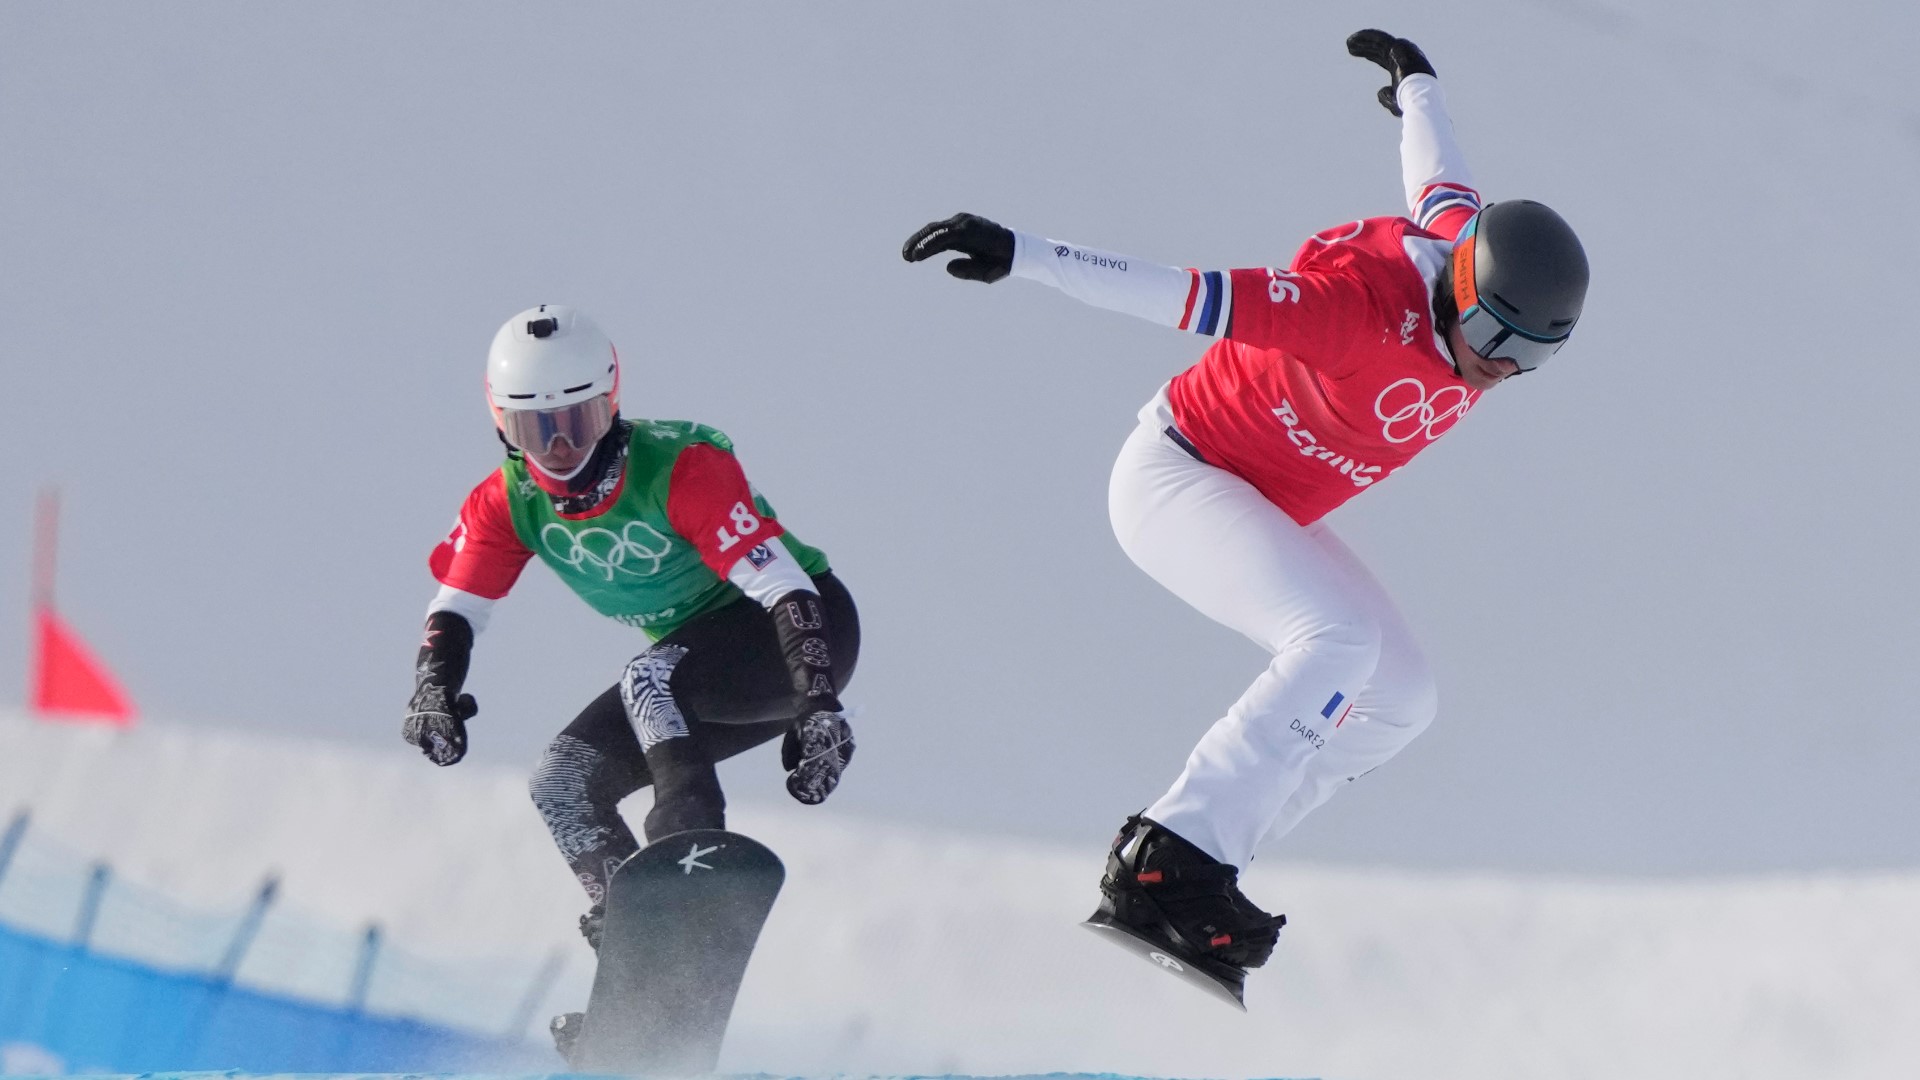 Get ready for a wild ride. Men and women team up on the snowboardcross course for the first time ever at the Winter Olympics Friday.